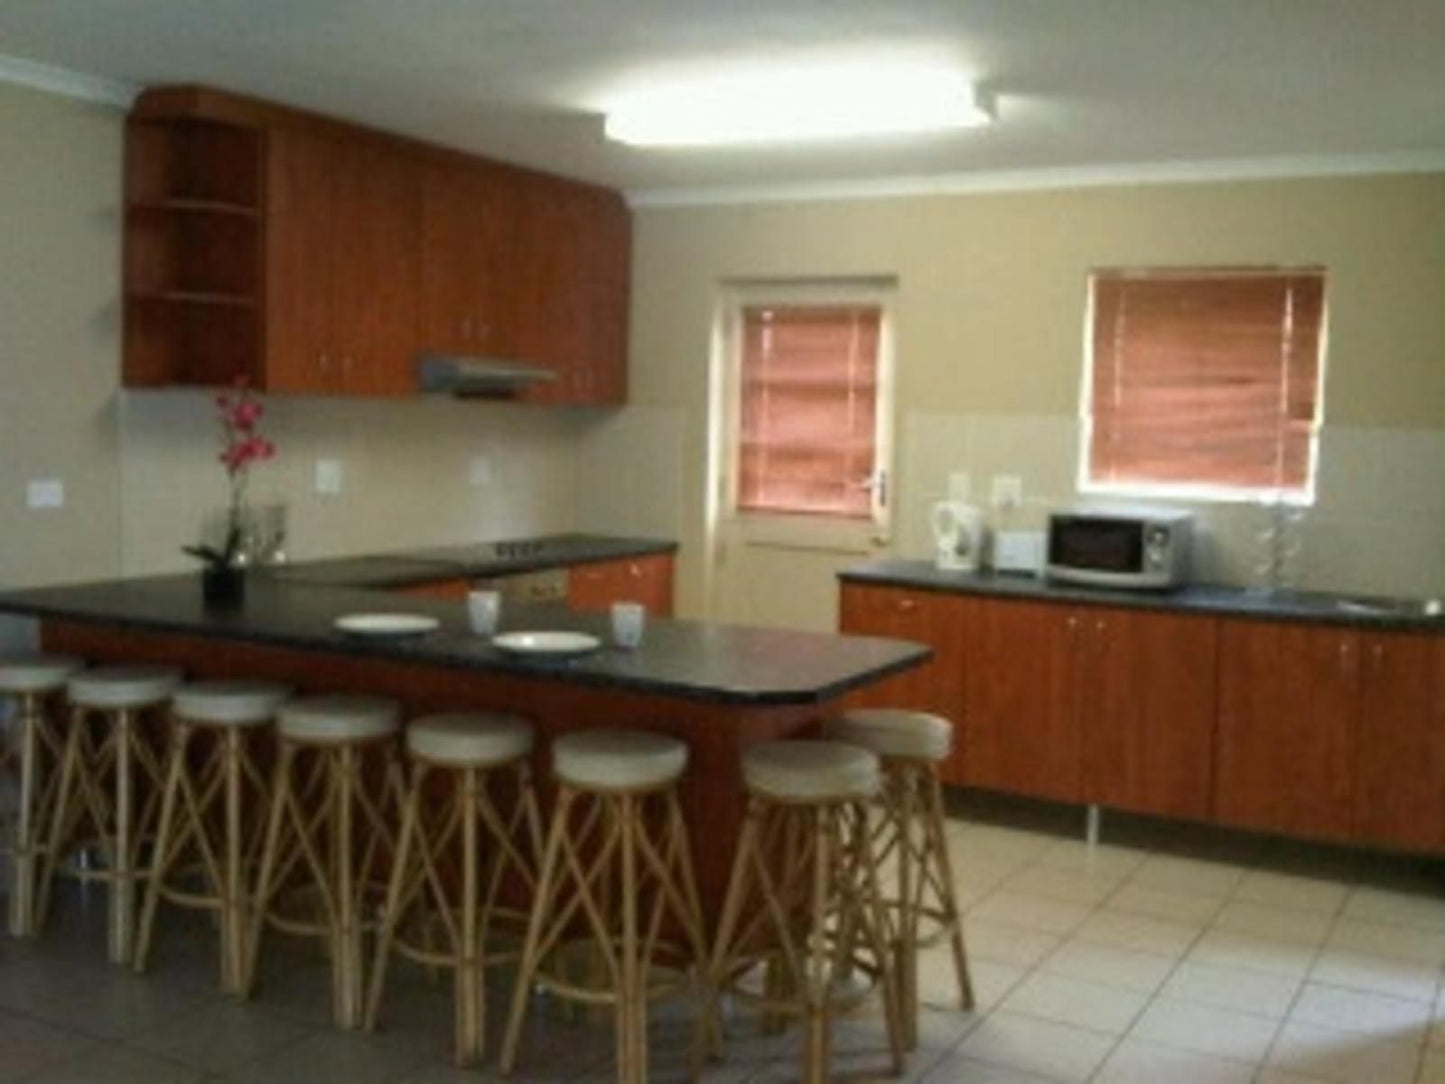 Bay Breeze Guesthouse Gordons Bay Western Cape South Africa Sepia Tones, Kitchen